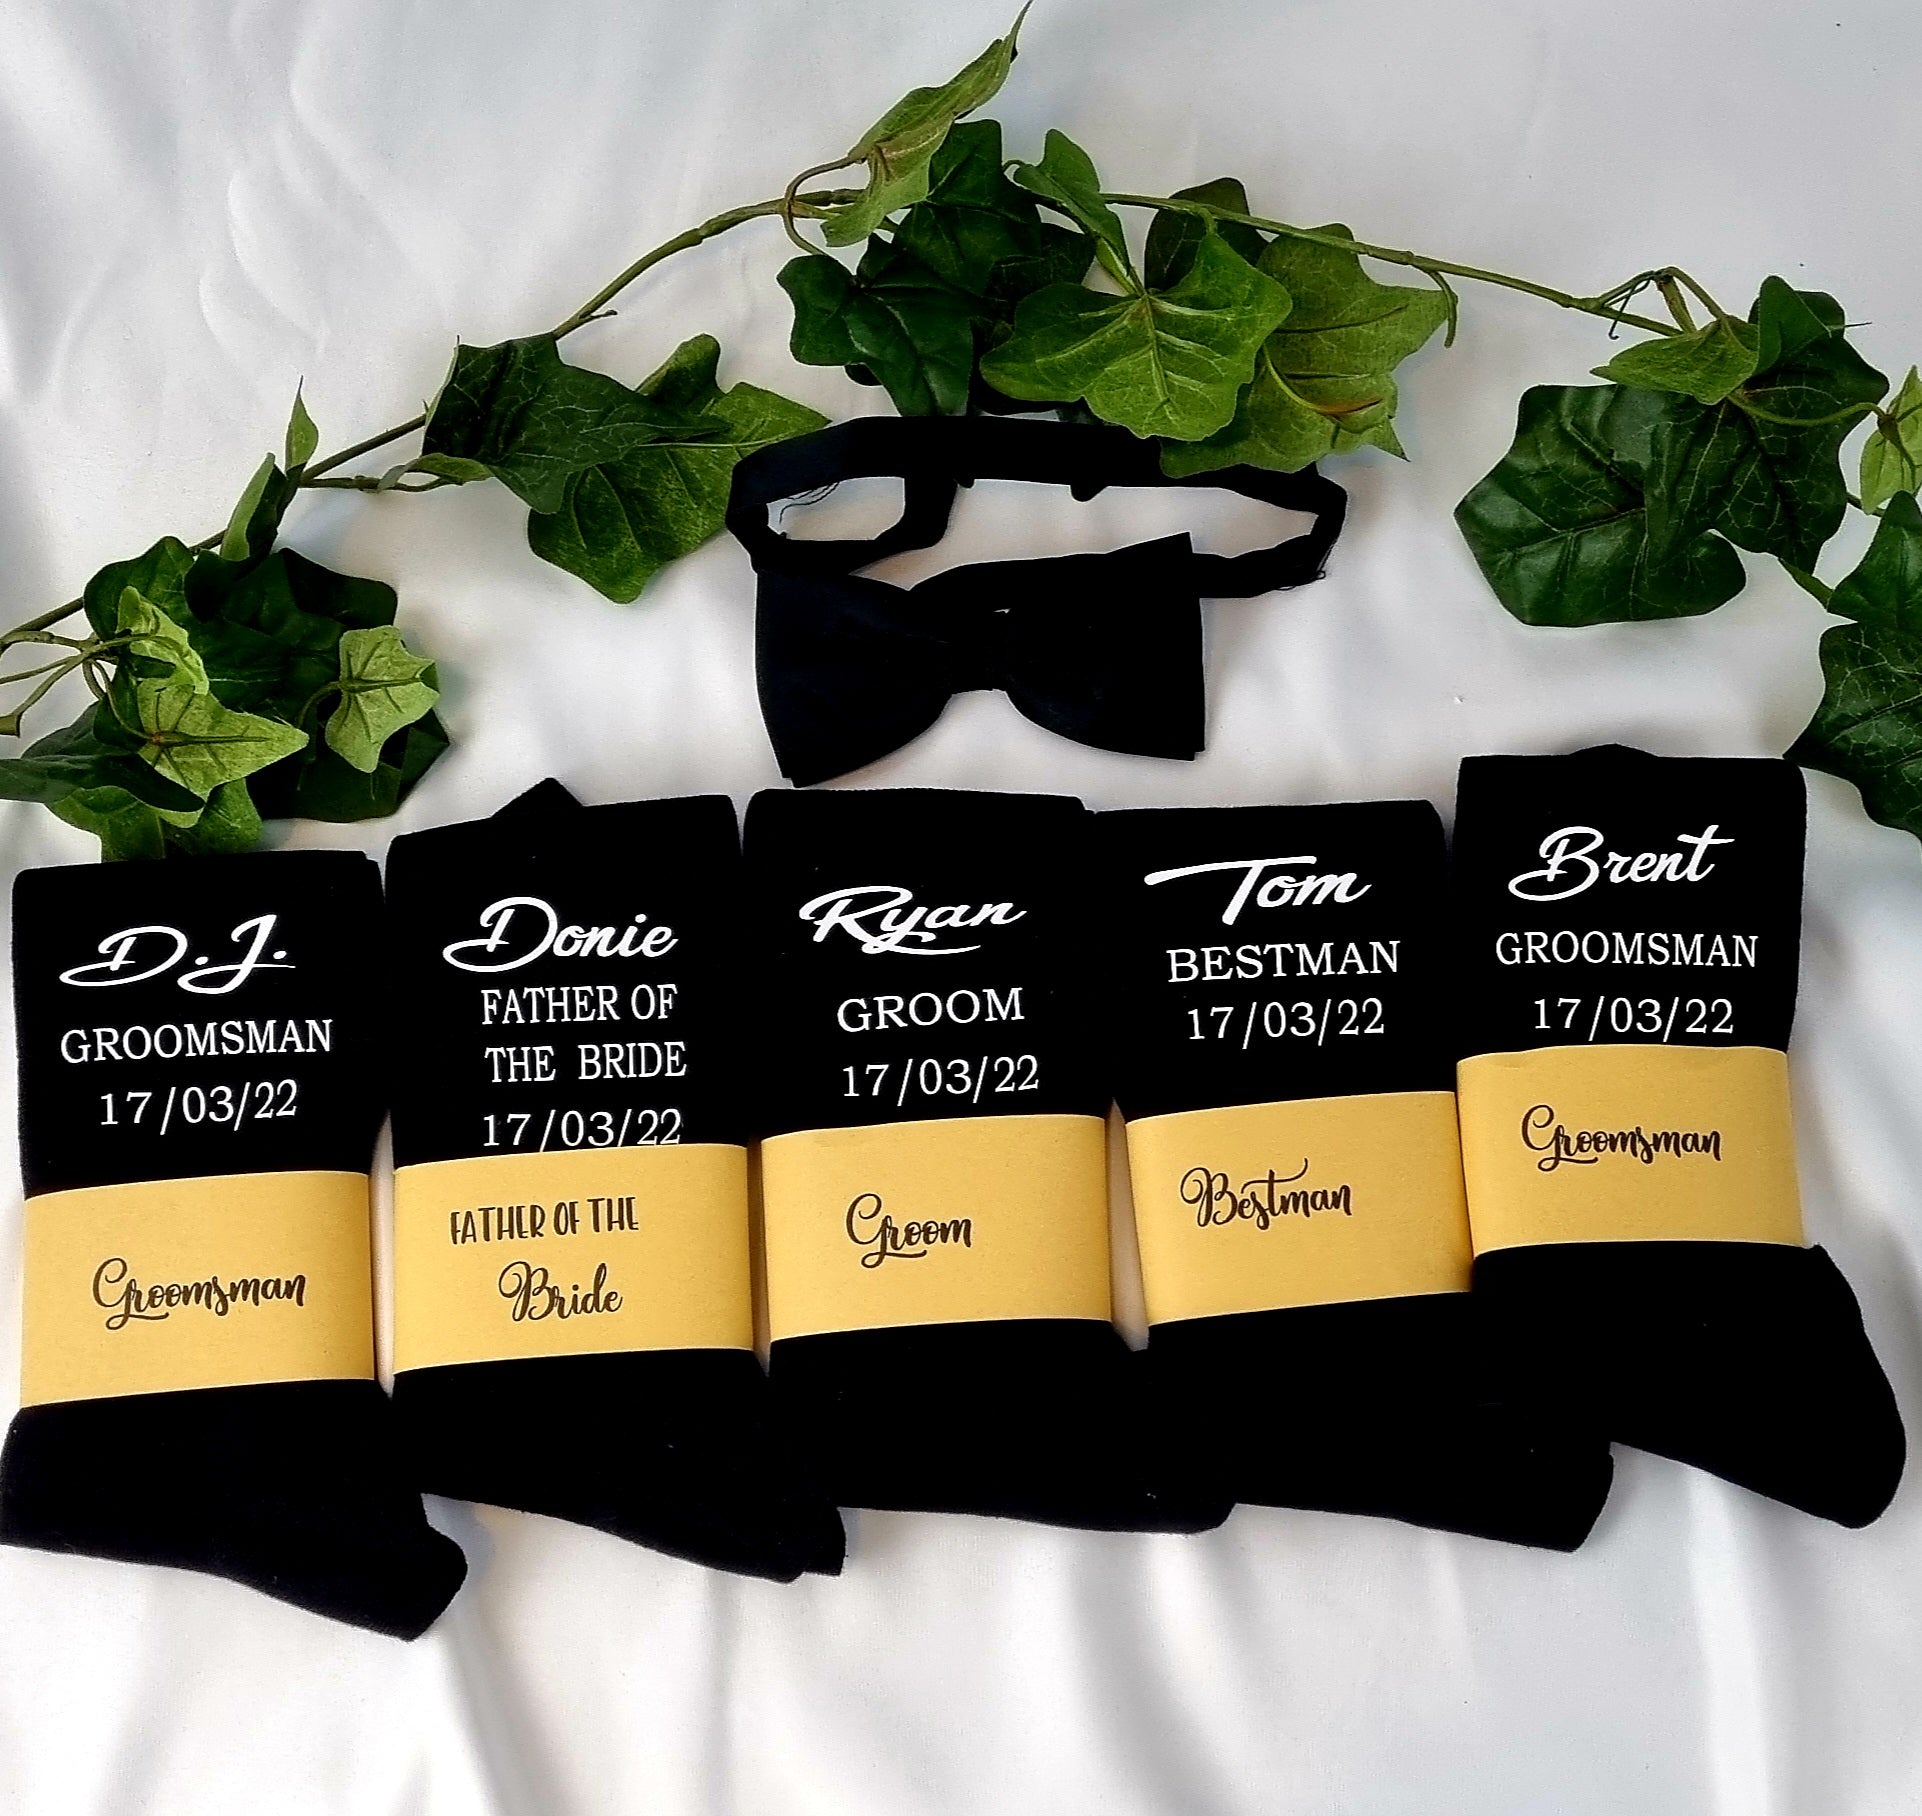 In case of cold feet personalised socks for your groom and groom party